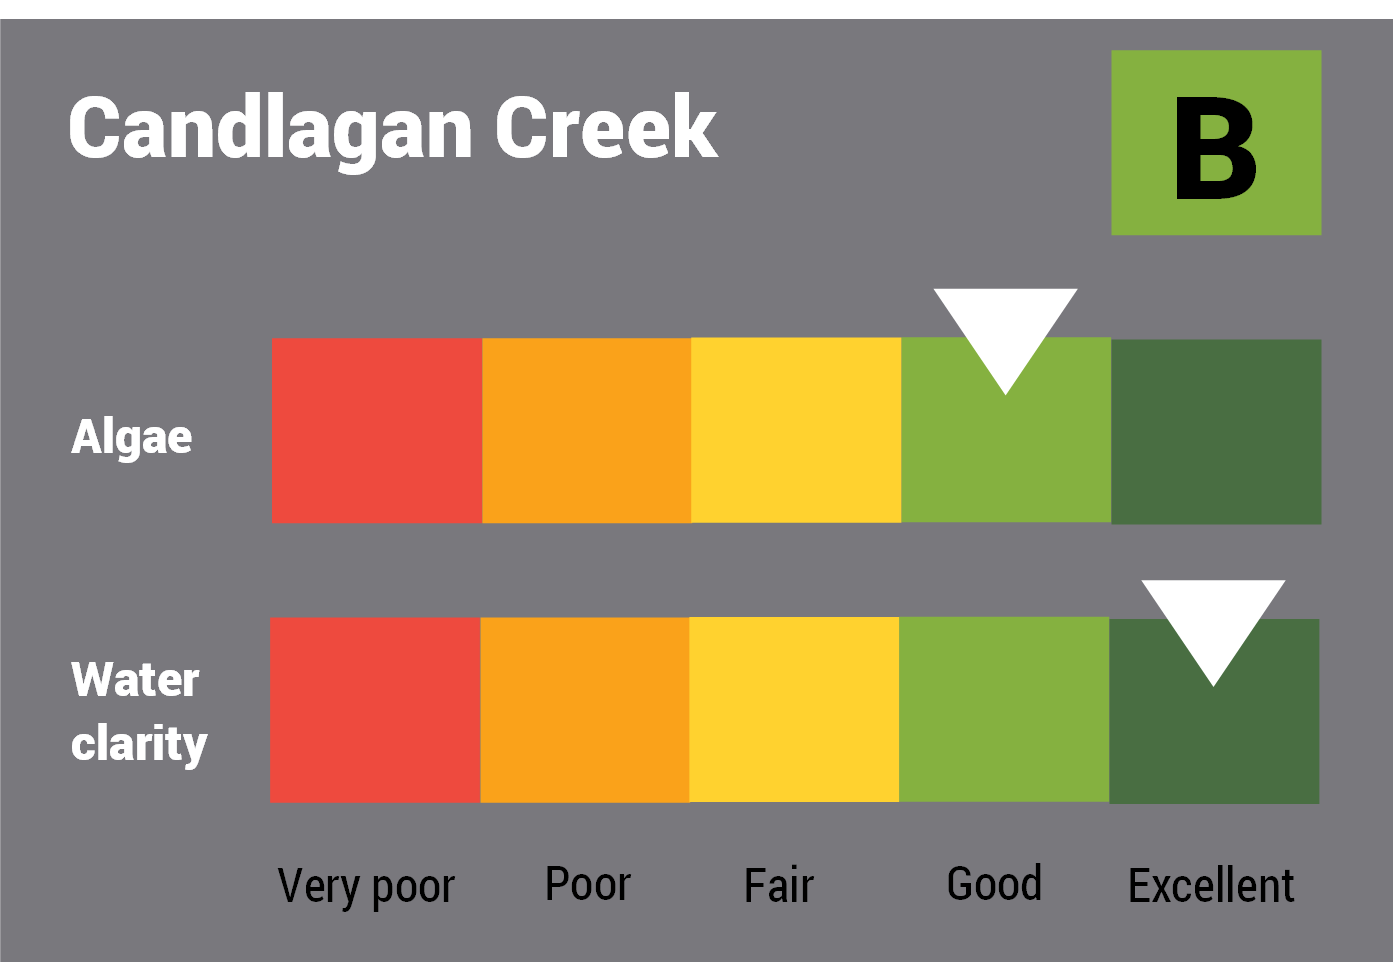 Candlagan Creek water quality report card for algae and water clarity showing colour-coded ratings (red, orange, yellow, light green and dark green, which represent very poor, poor, fair, good and excellent, respectively). Algae is rated 'fair' and water clarity is rated 'good' giving an overall rating of 'good' or 'B'.